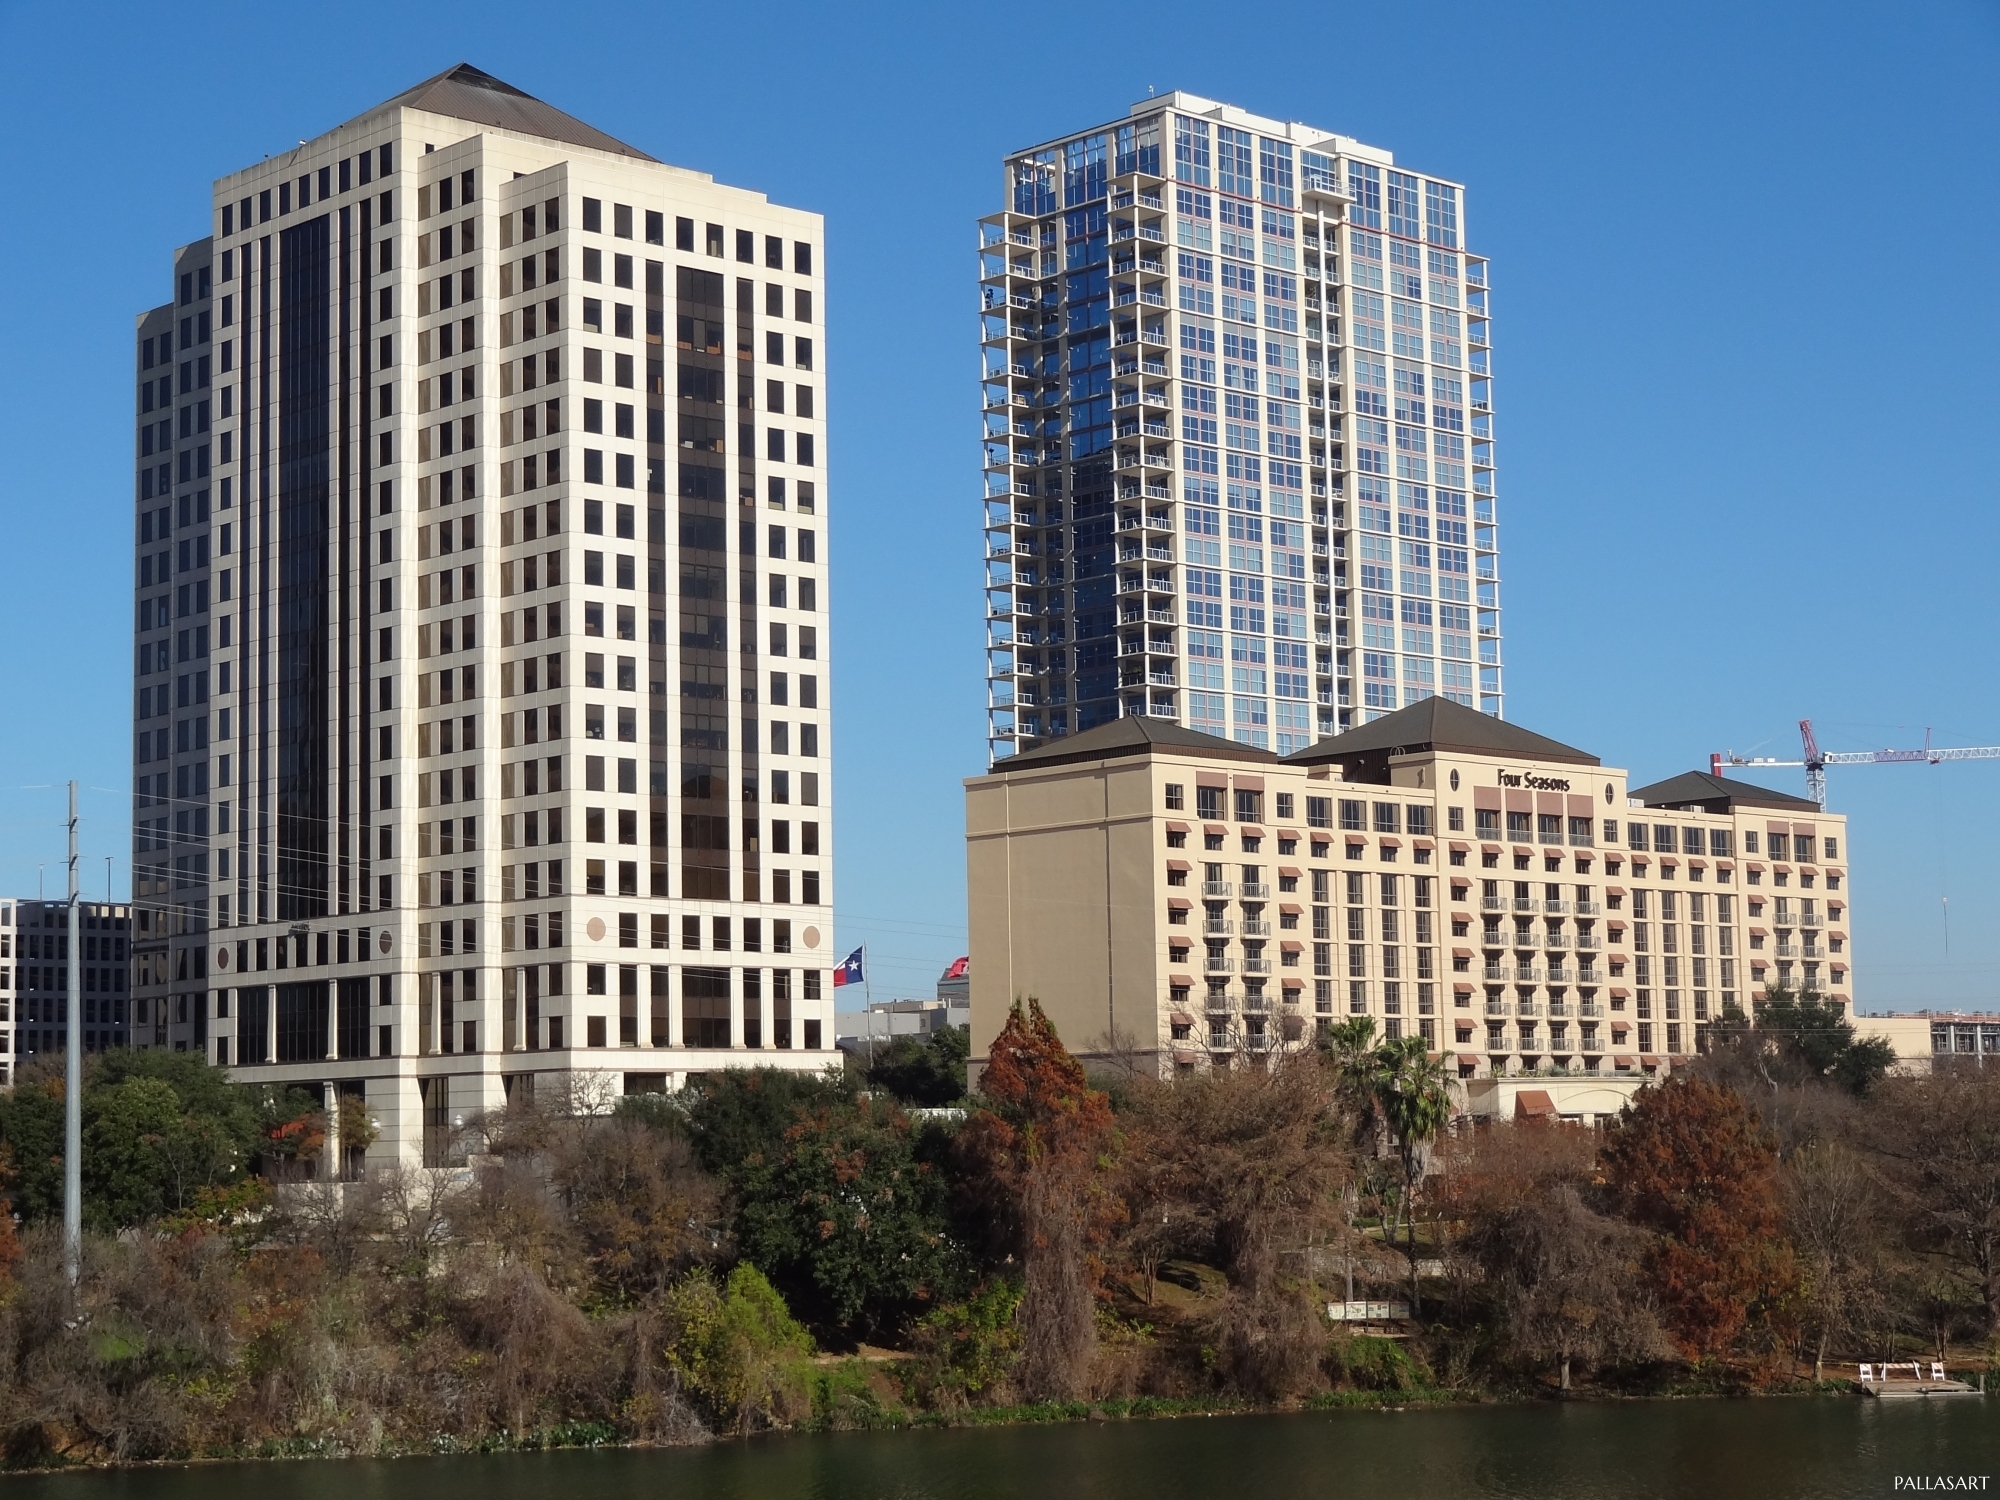 The Four Seasons complex on North Shore of Austin's Lady Bird Lake